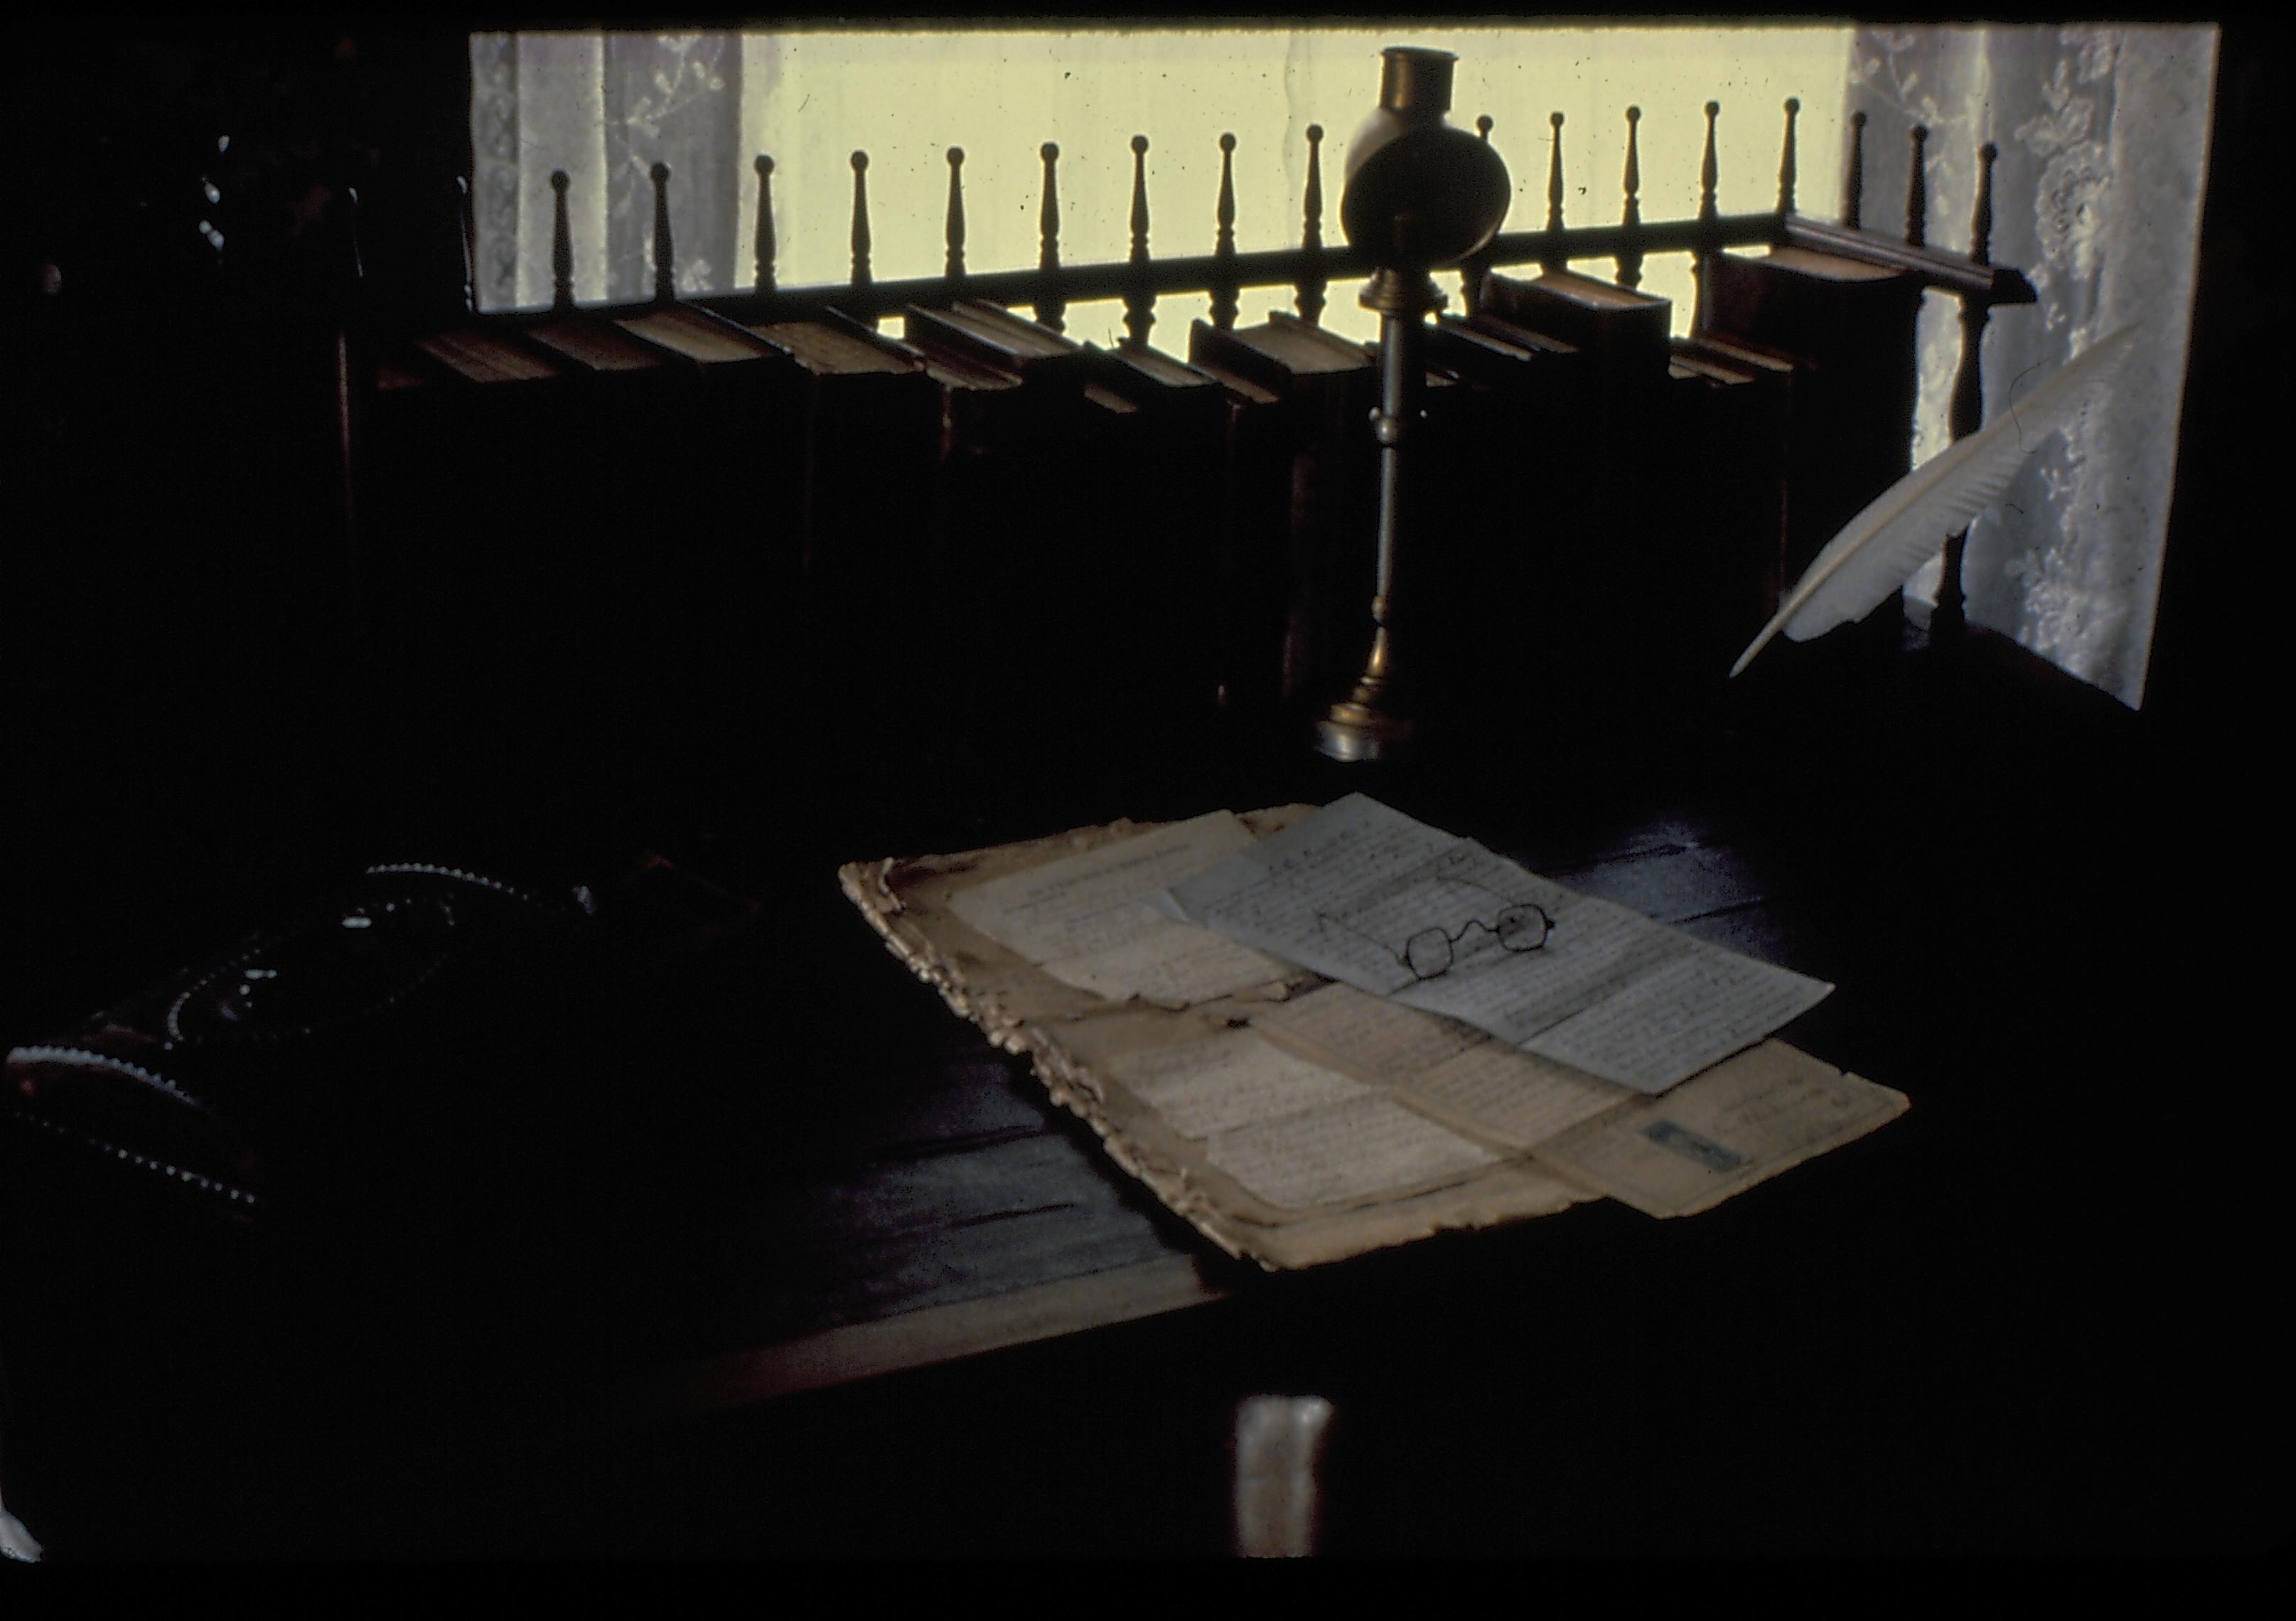 Lincoln's Bedroom 201, 3C.2 Lincoln Home, Bedroom, spindle table, documents, quill pen, books